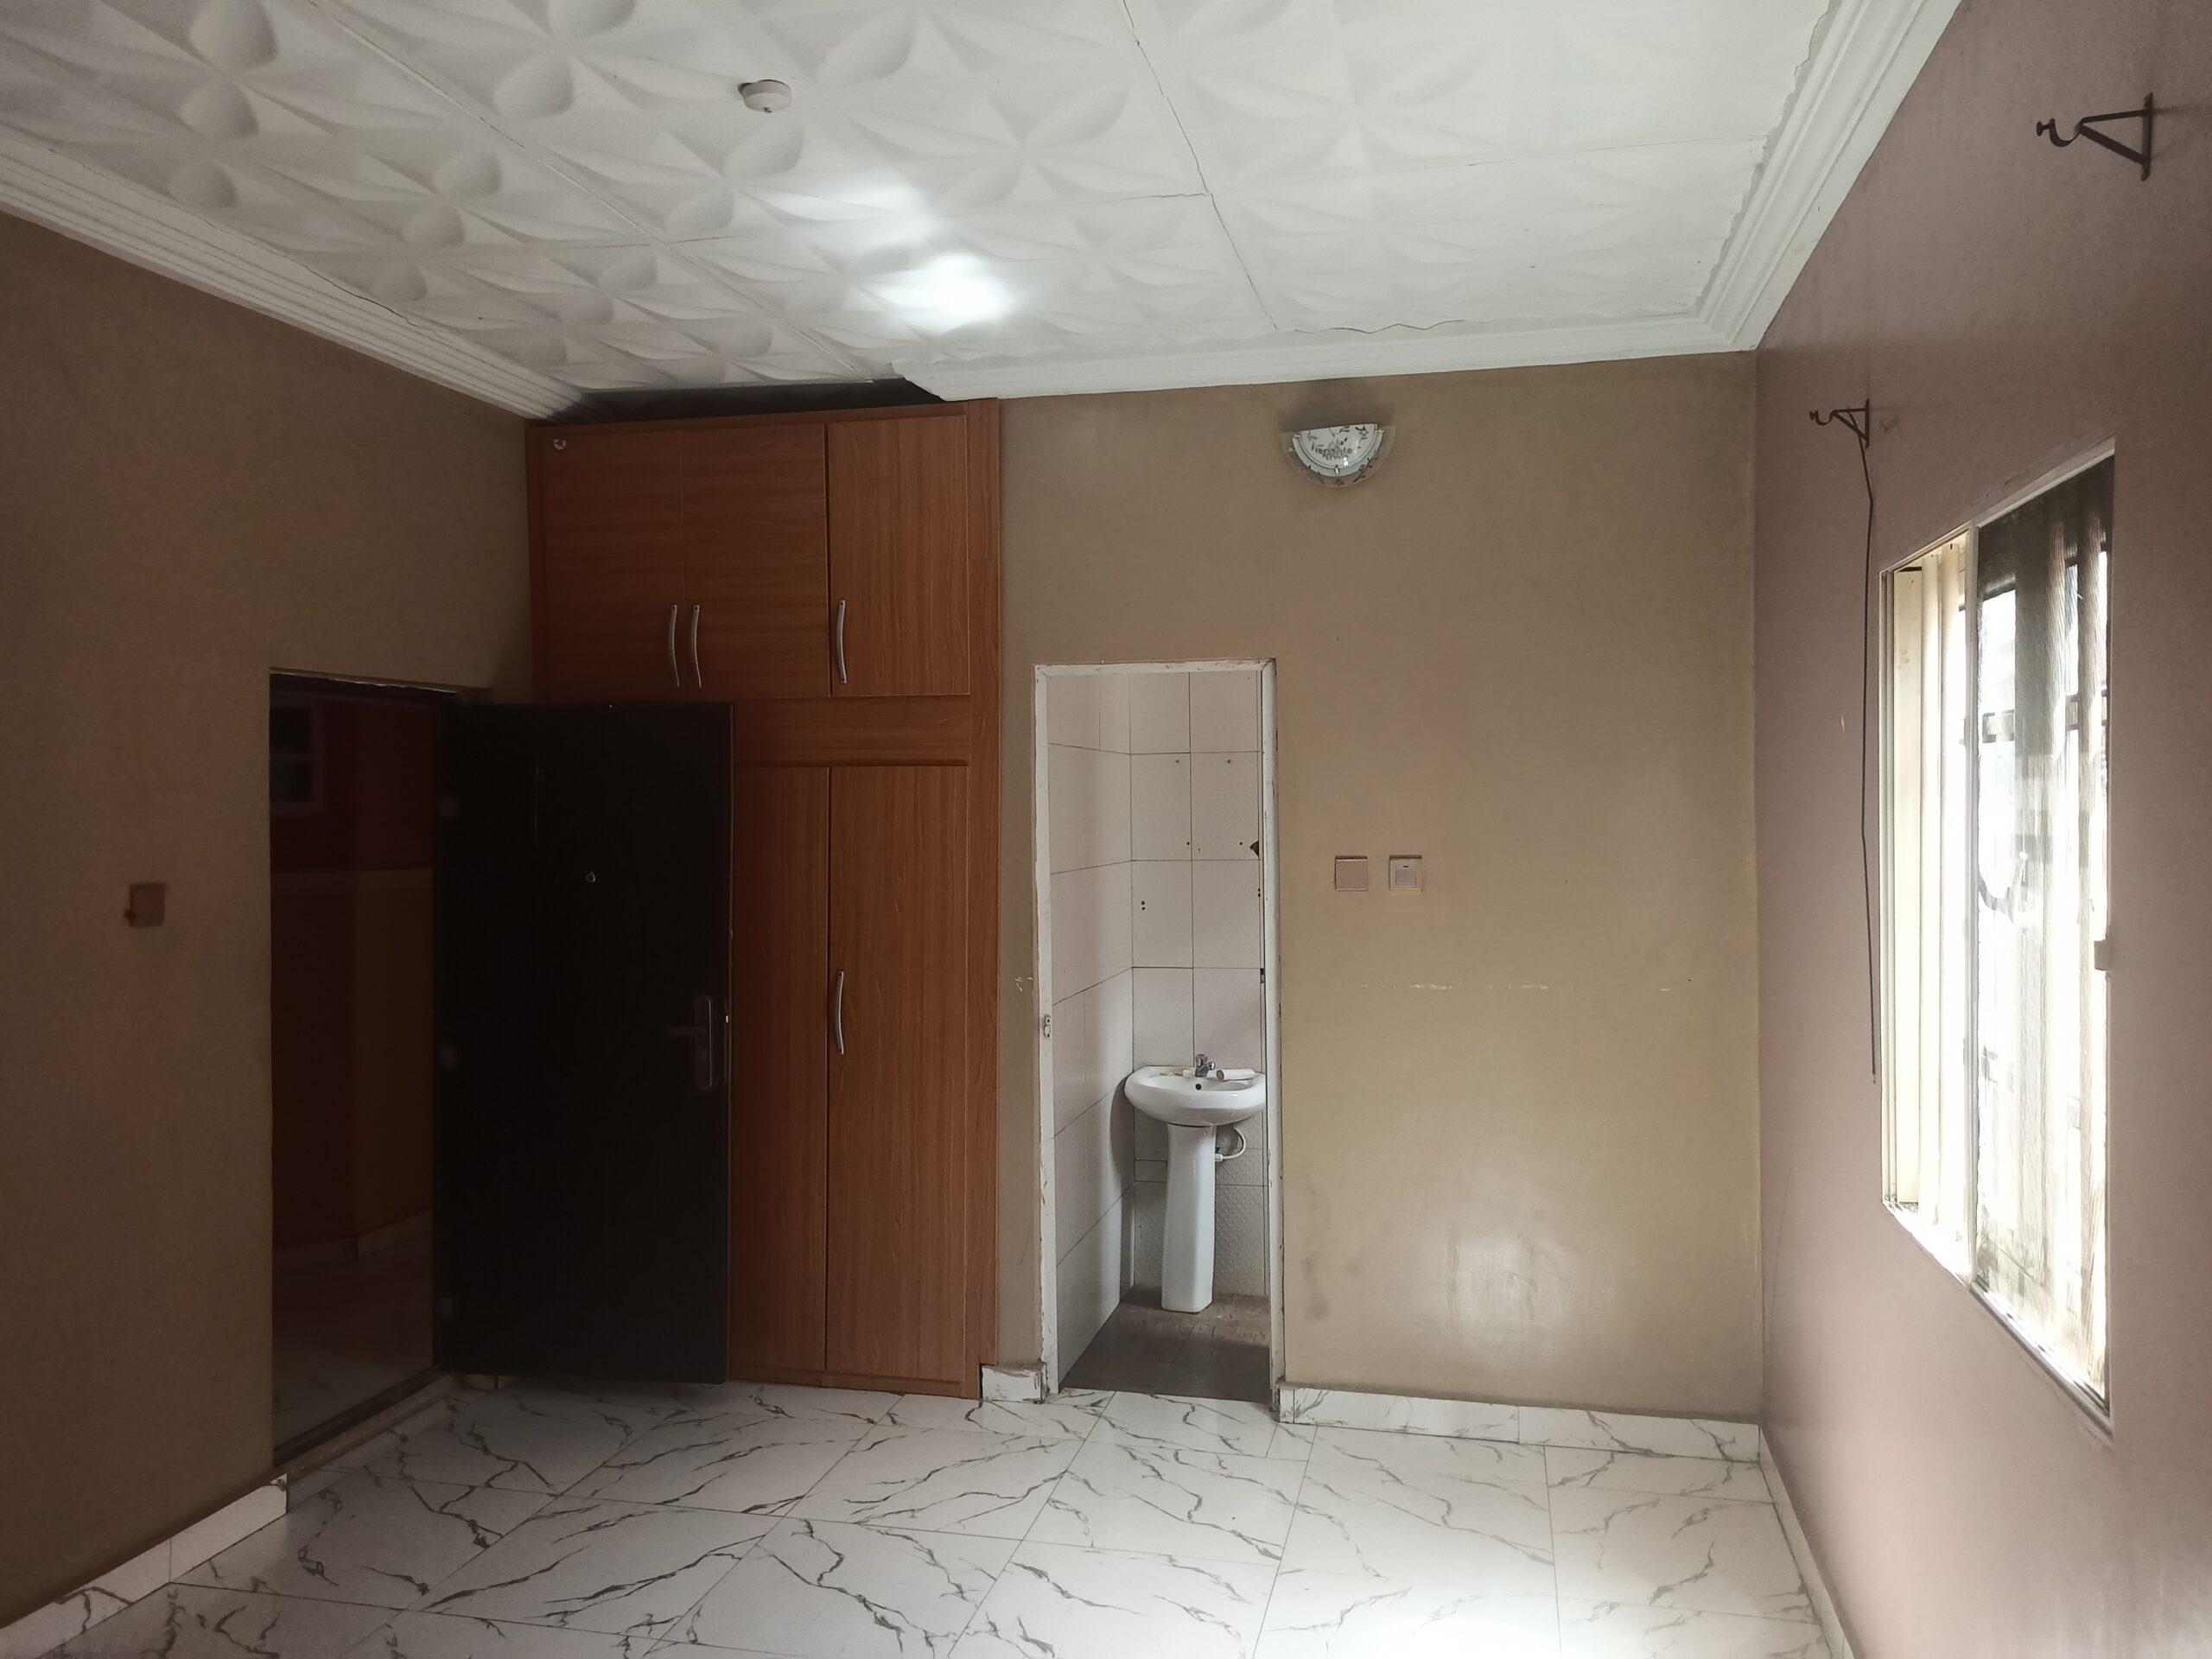 Detached 4 Bedroom All Ensuite Bungalow with Visitor’S Toilet